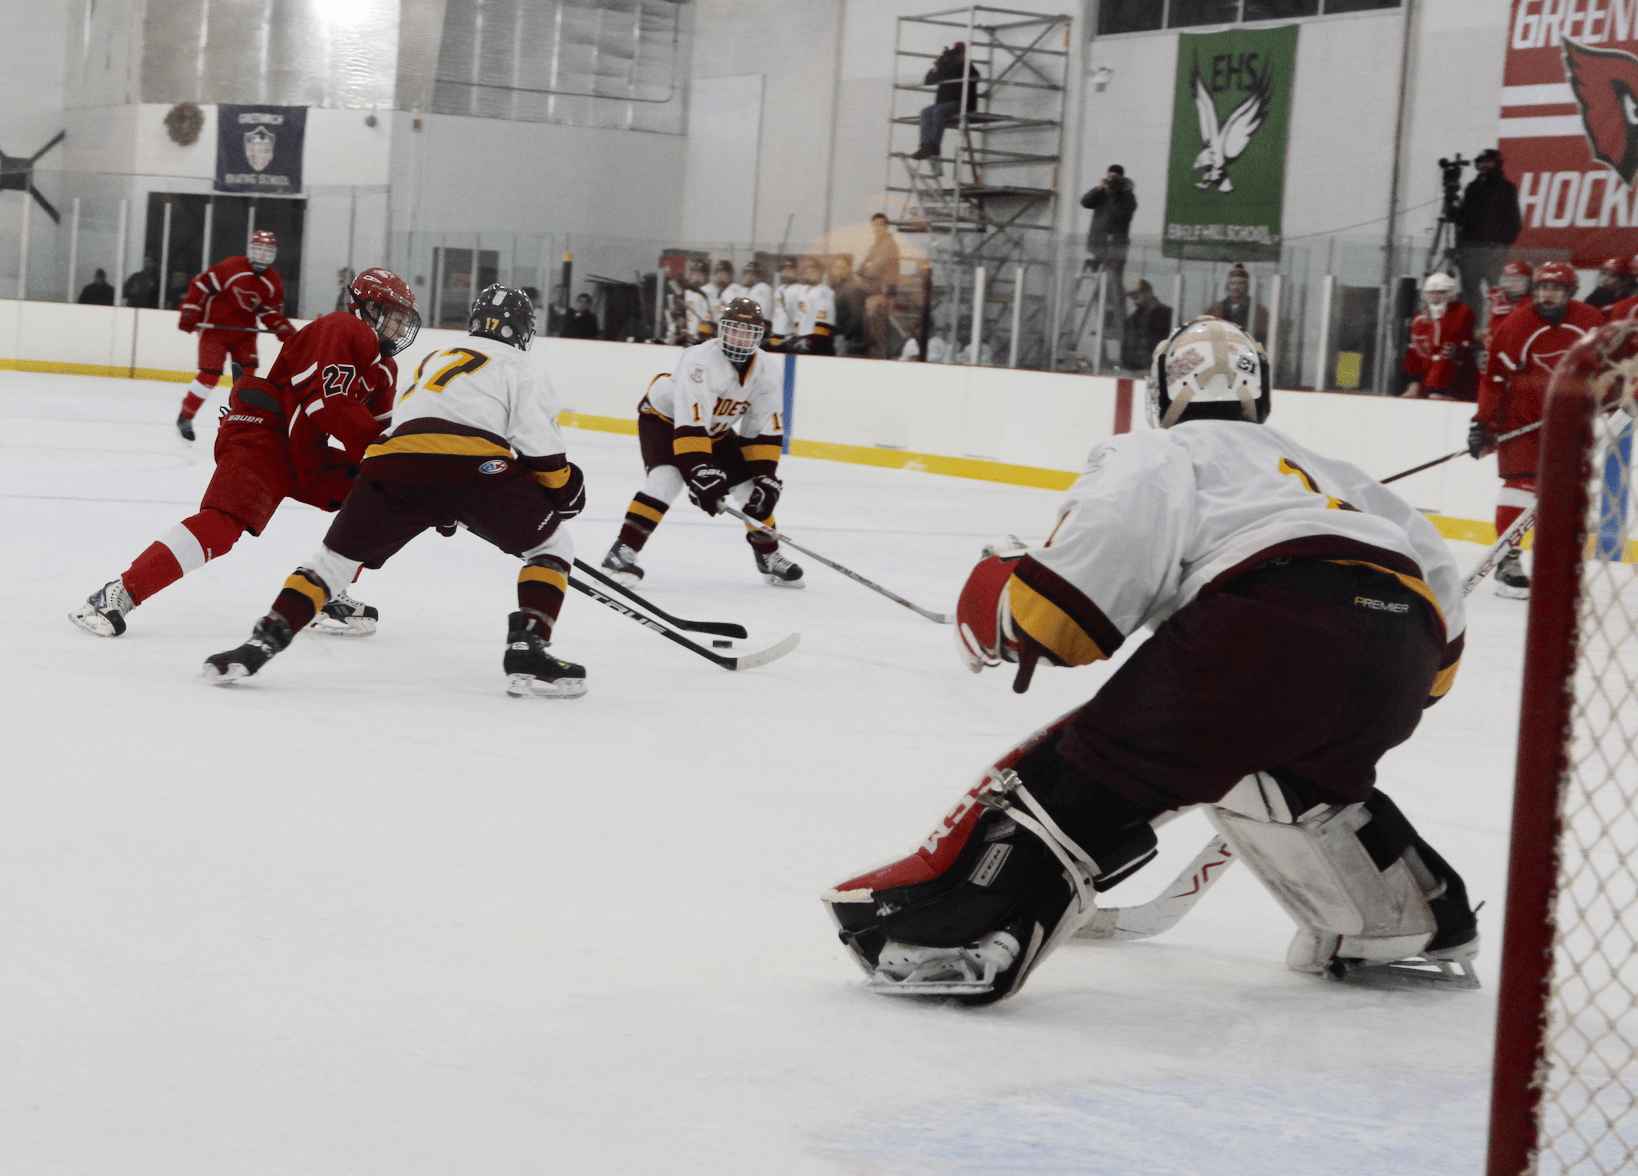 Cardinals dominated the Cadets in the season opener at Hamill Rink, Dec 16, 2017 Photo: Leslie Yager